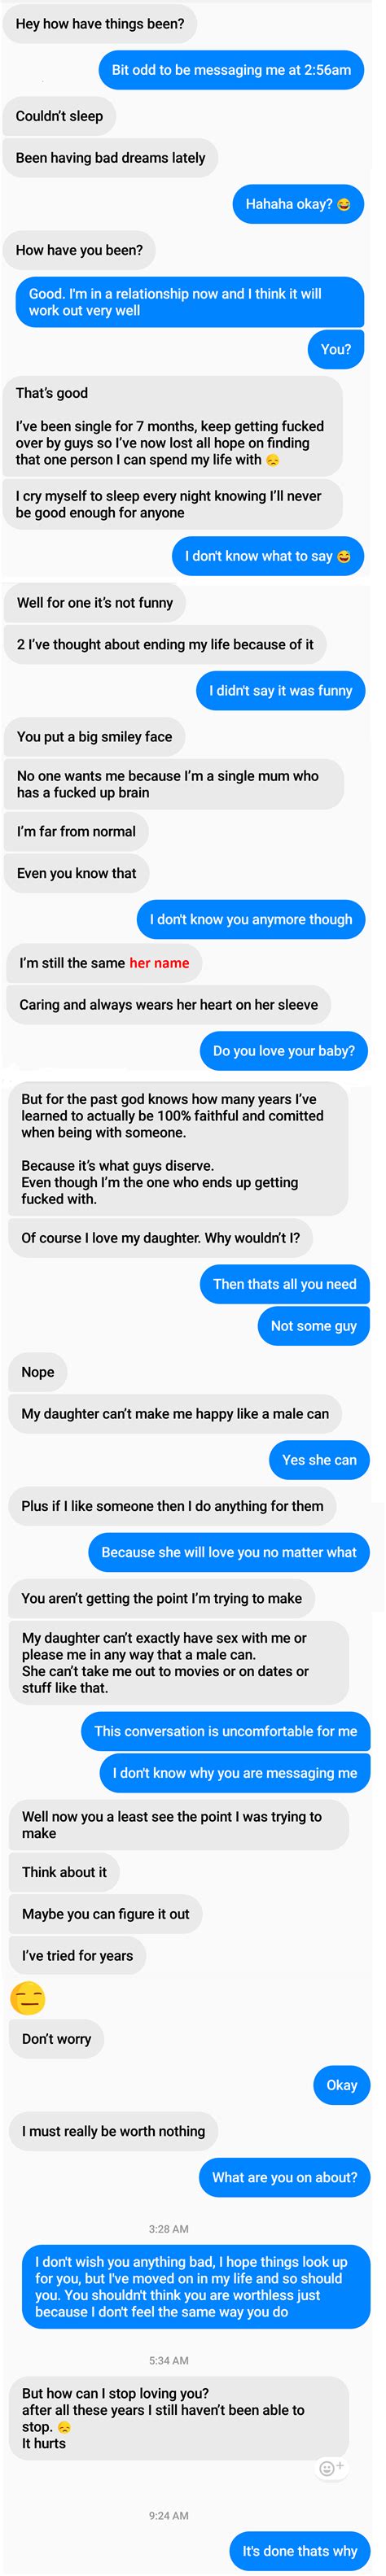 cheating ex messages me after 2 years of us not talking my daughter can t exactly have sex